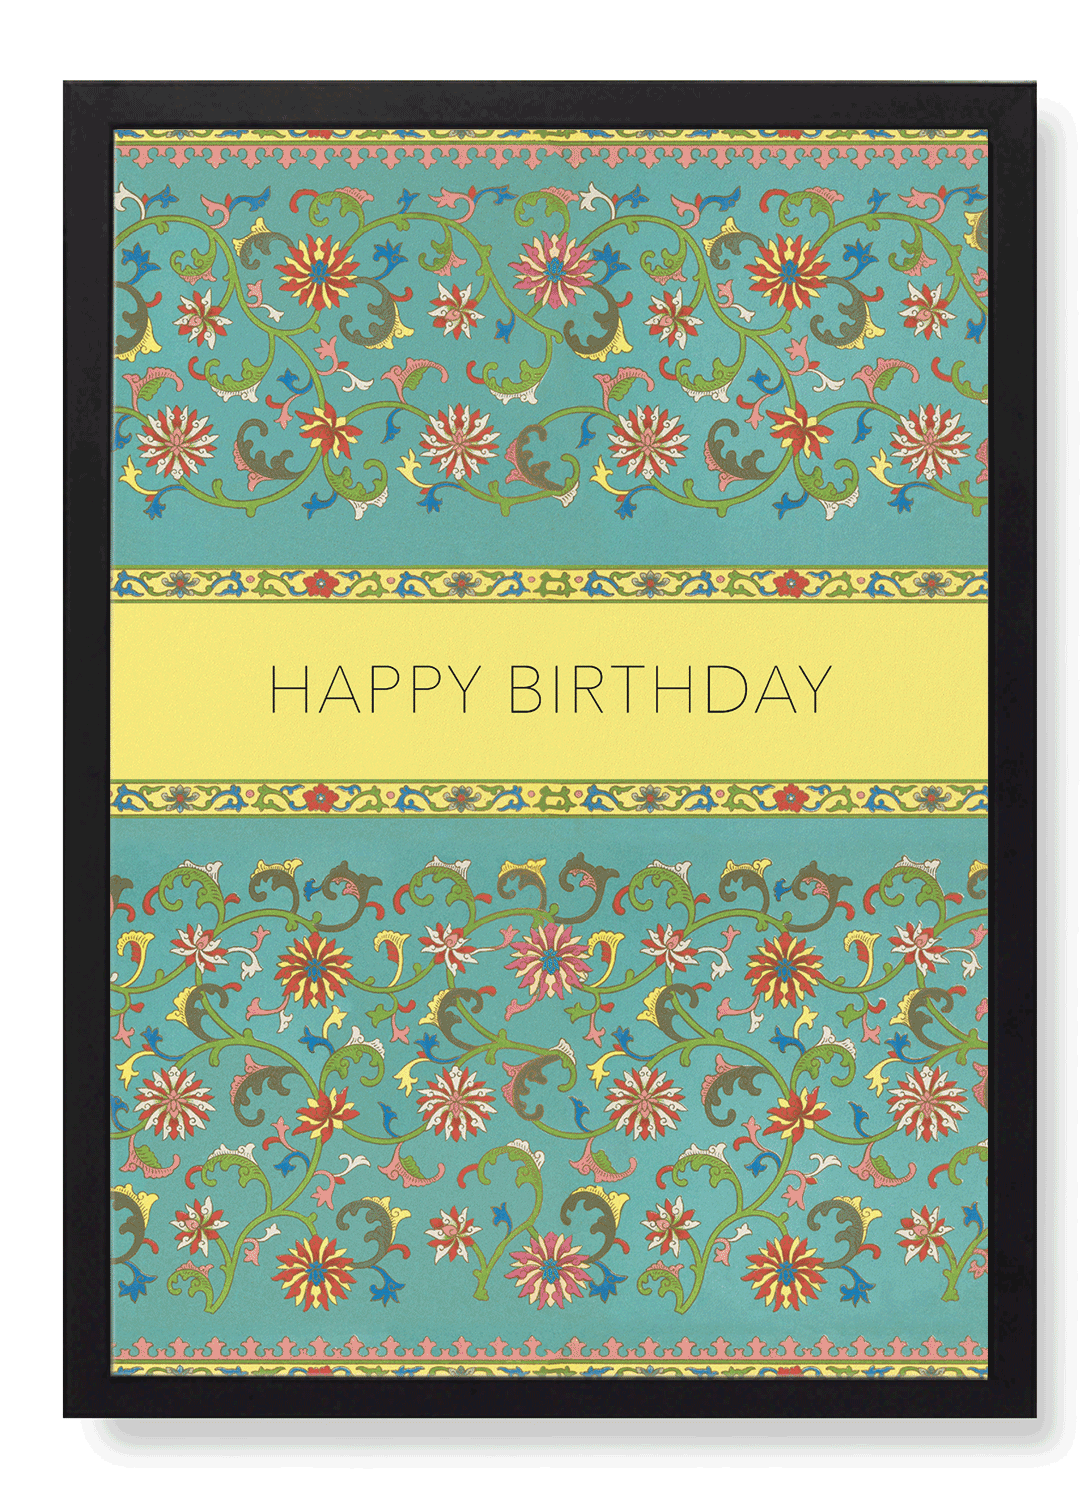 BIRTHDAY WISHES ON CHINESE PATTERN